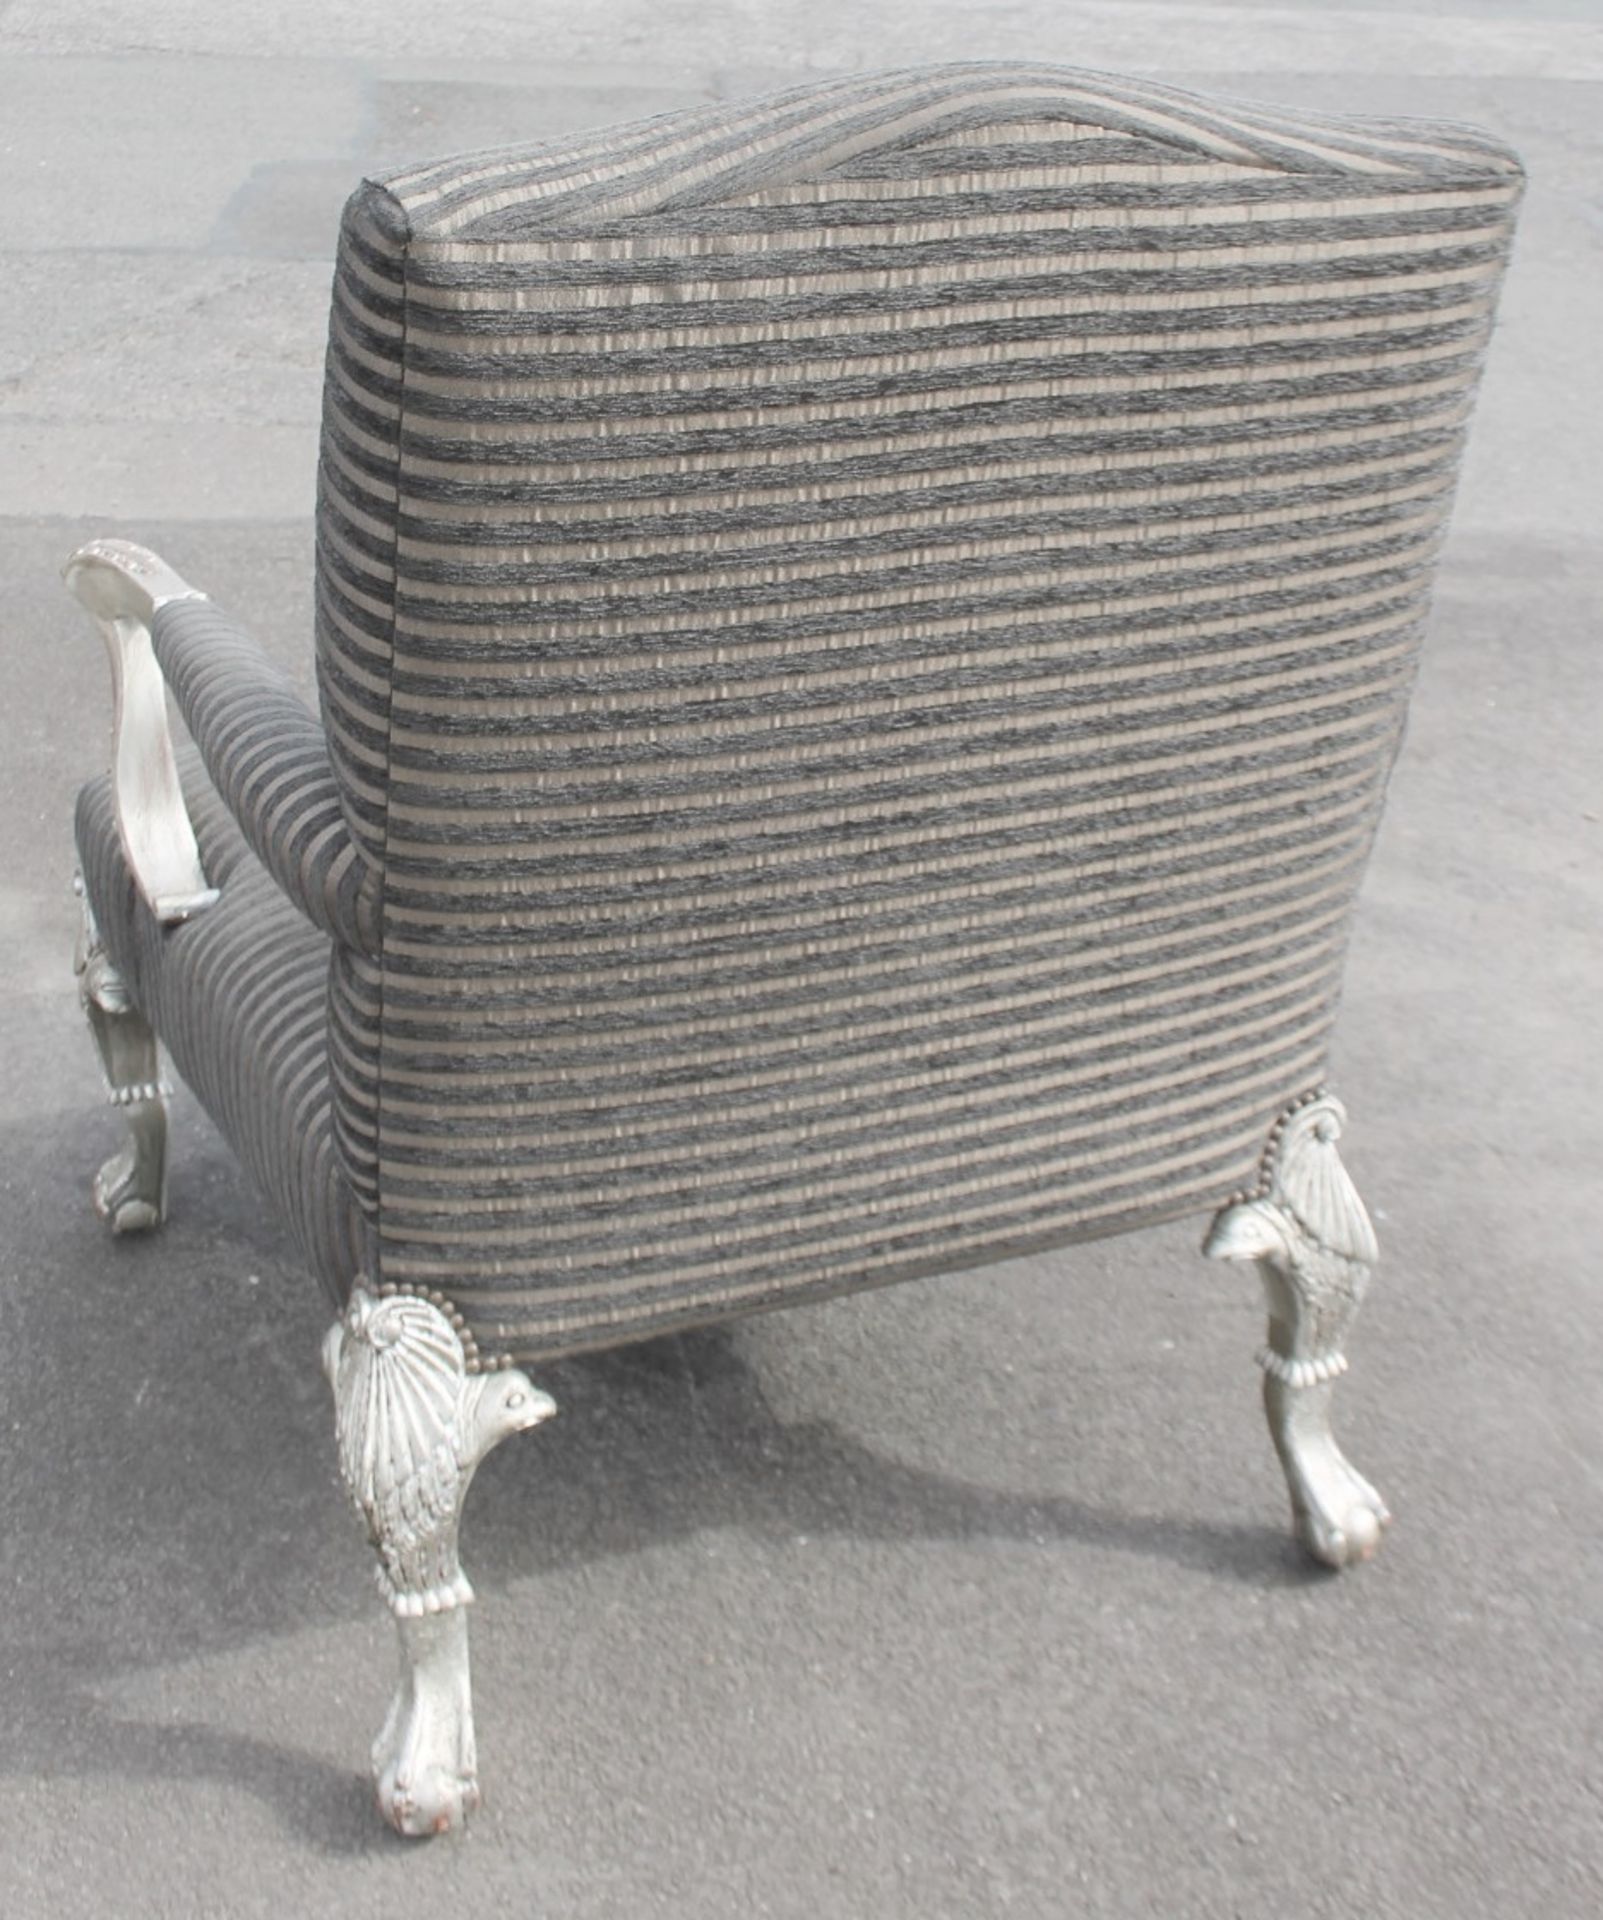 1 x Stylish Oversized Striped Armchair Featuring Carved Ball And Claw Feet With Ball Castors And - Image 7 of 8